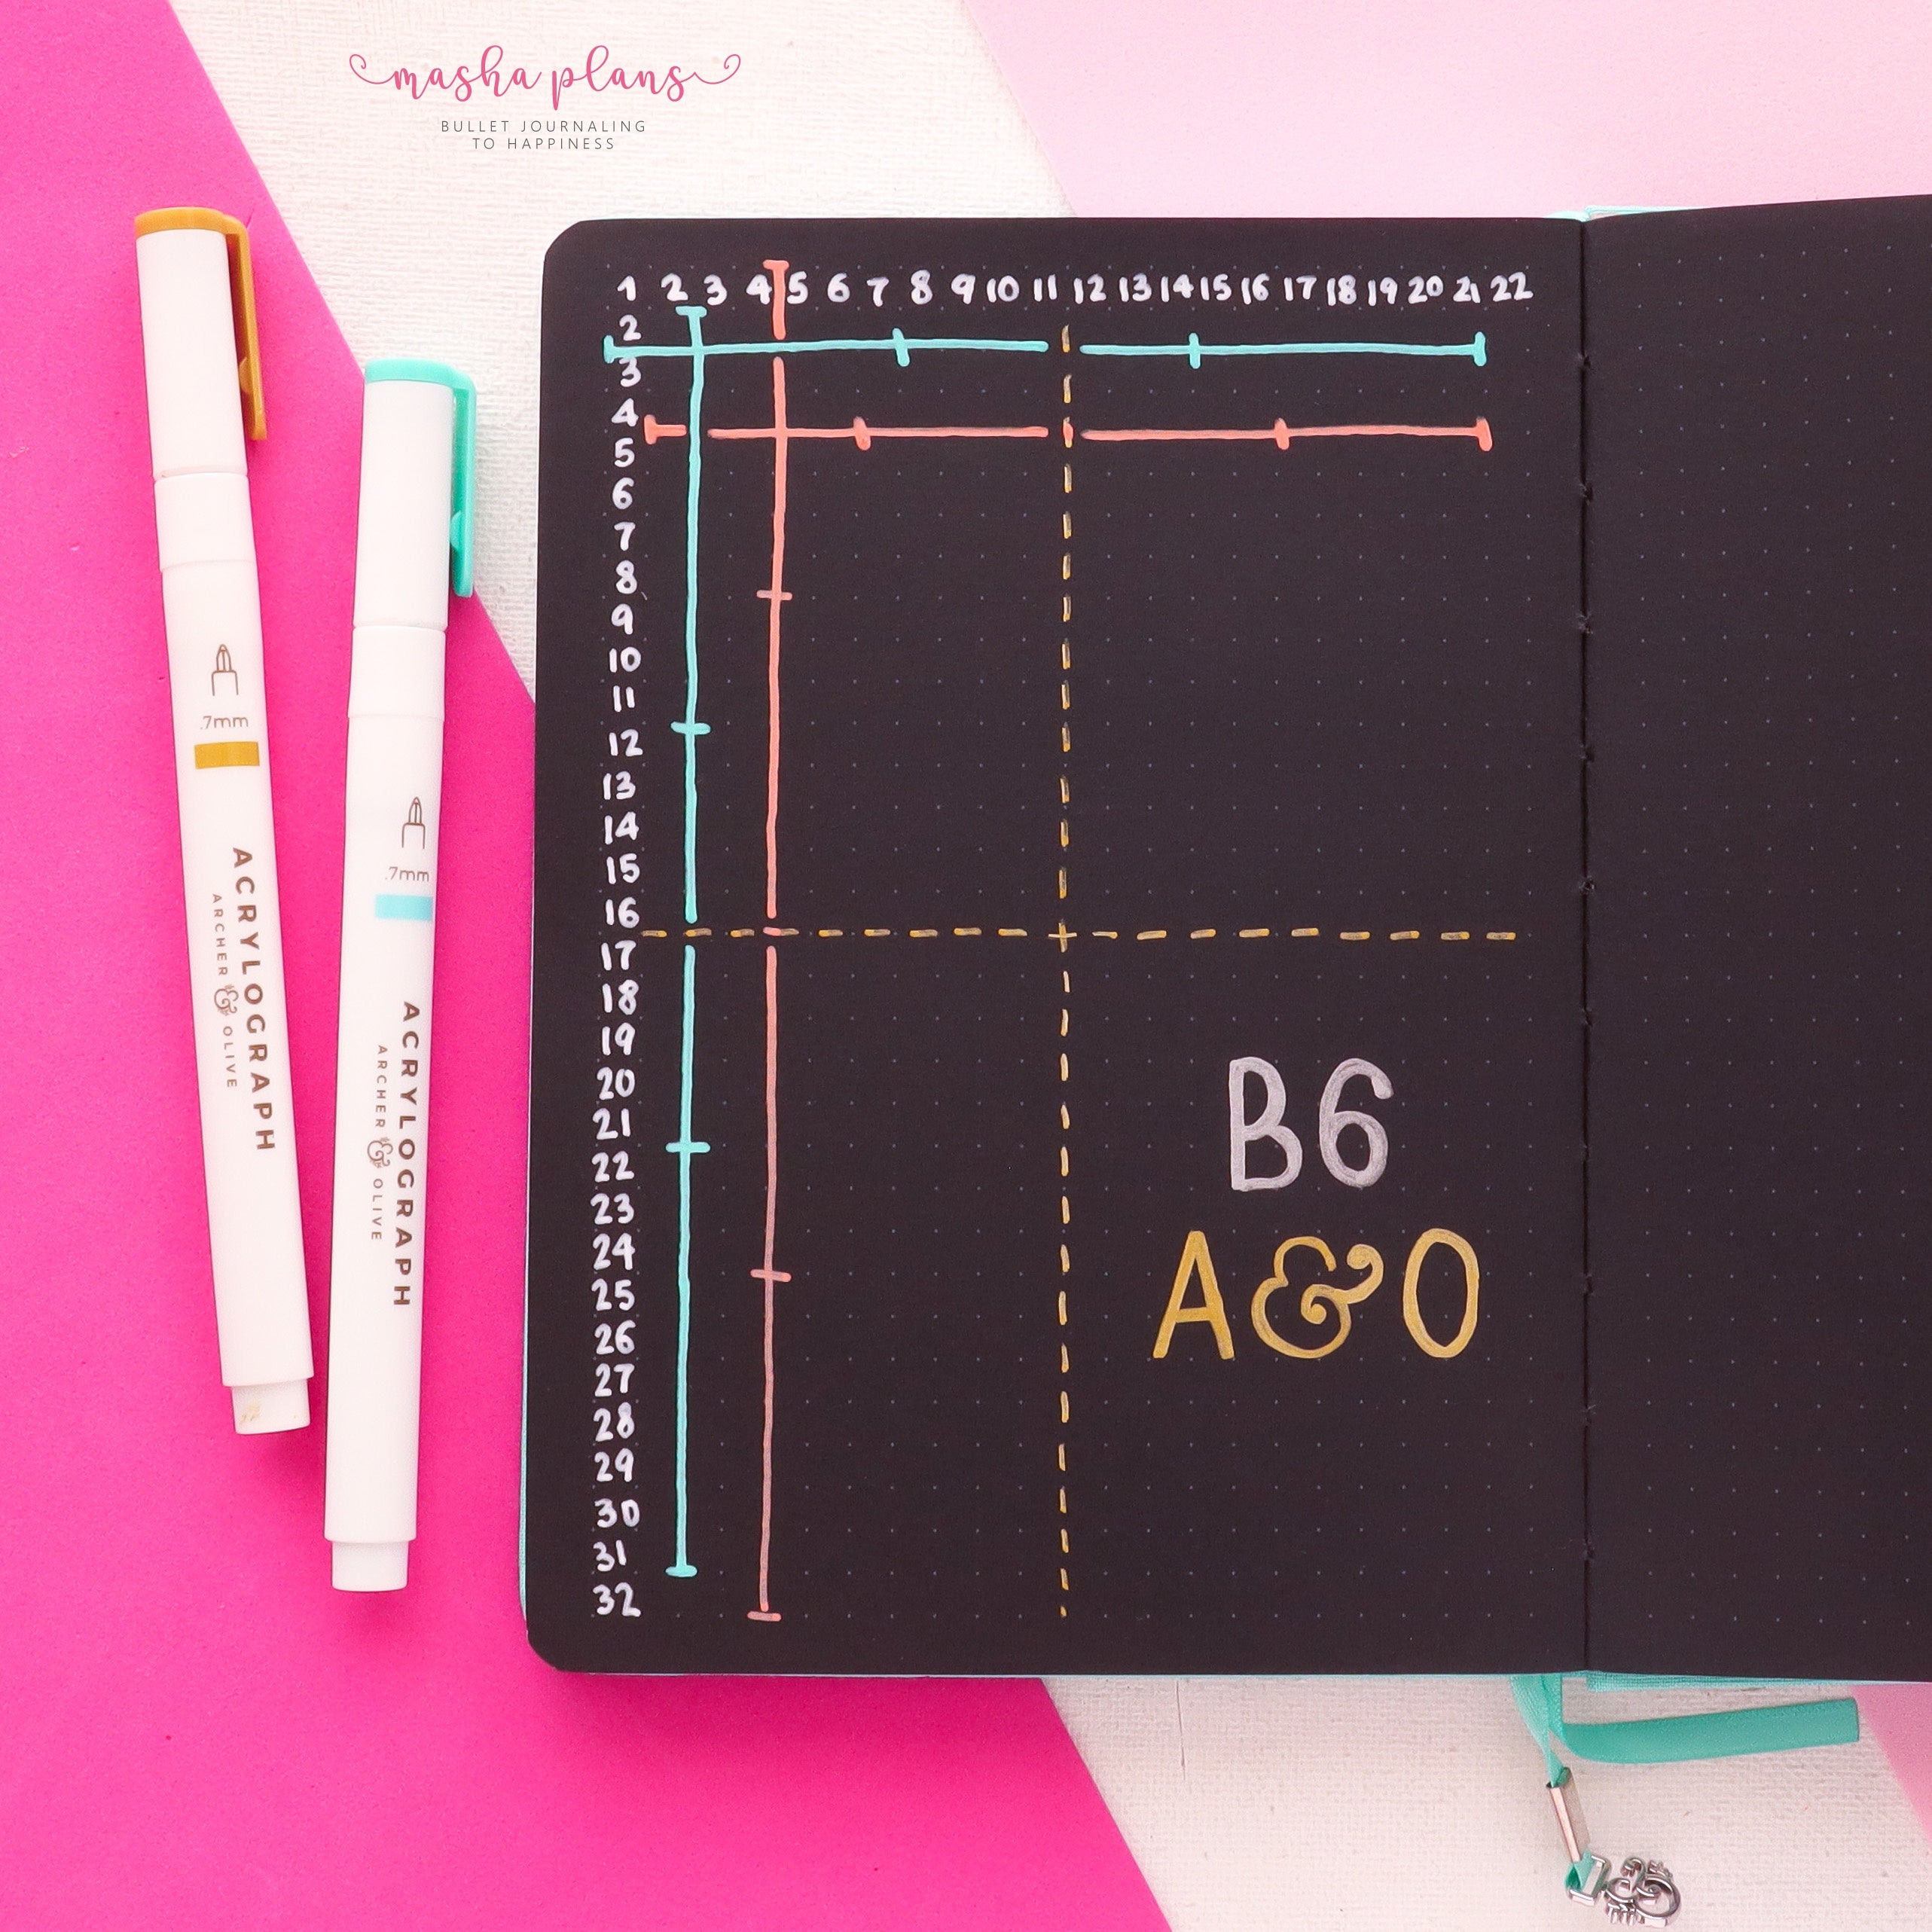 A5 Printable Dot Grid and Lined Paper Bullet Journal Paper A5 Dotted Paper  A5 Lined Paper 